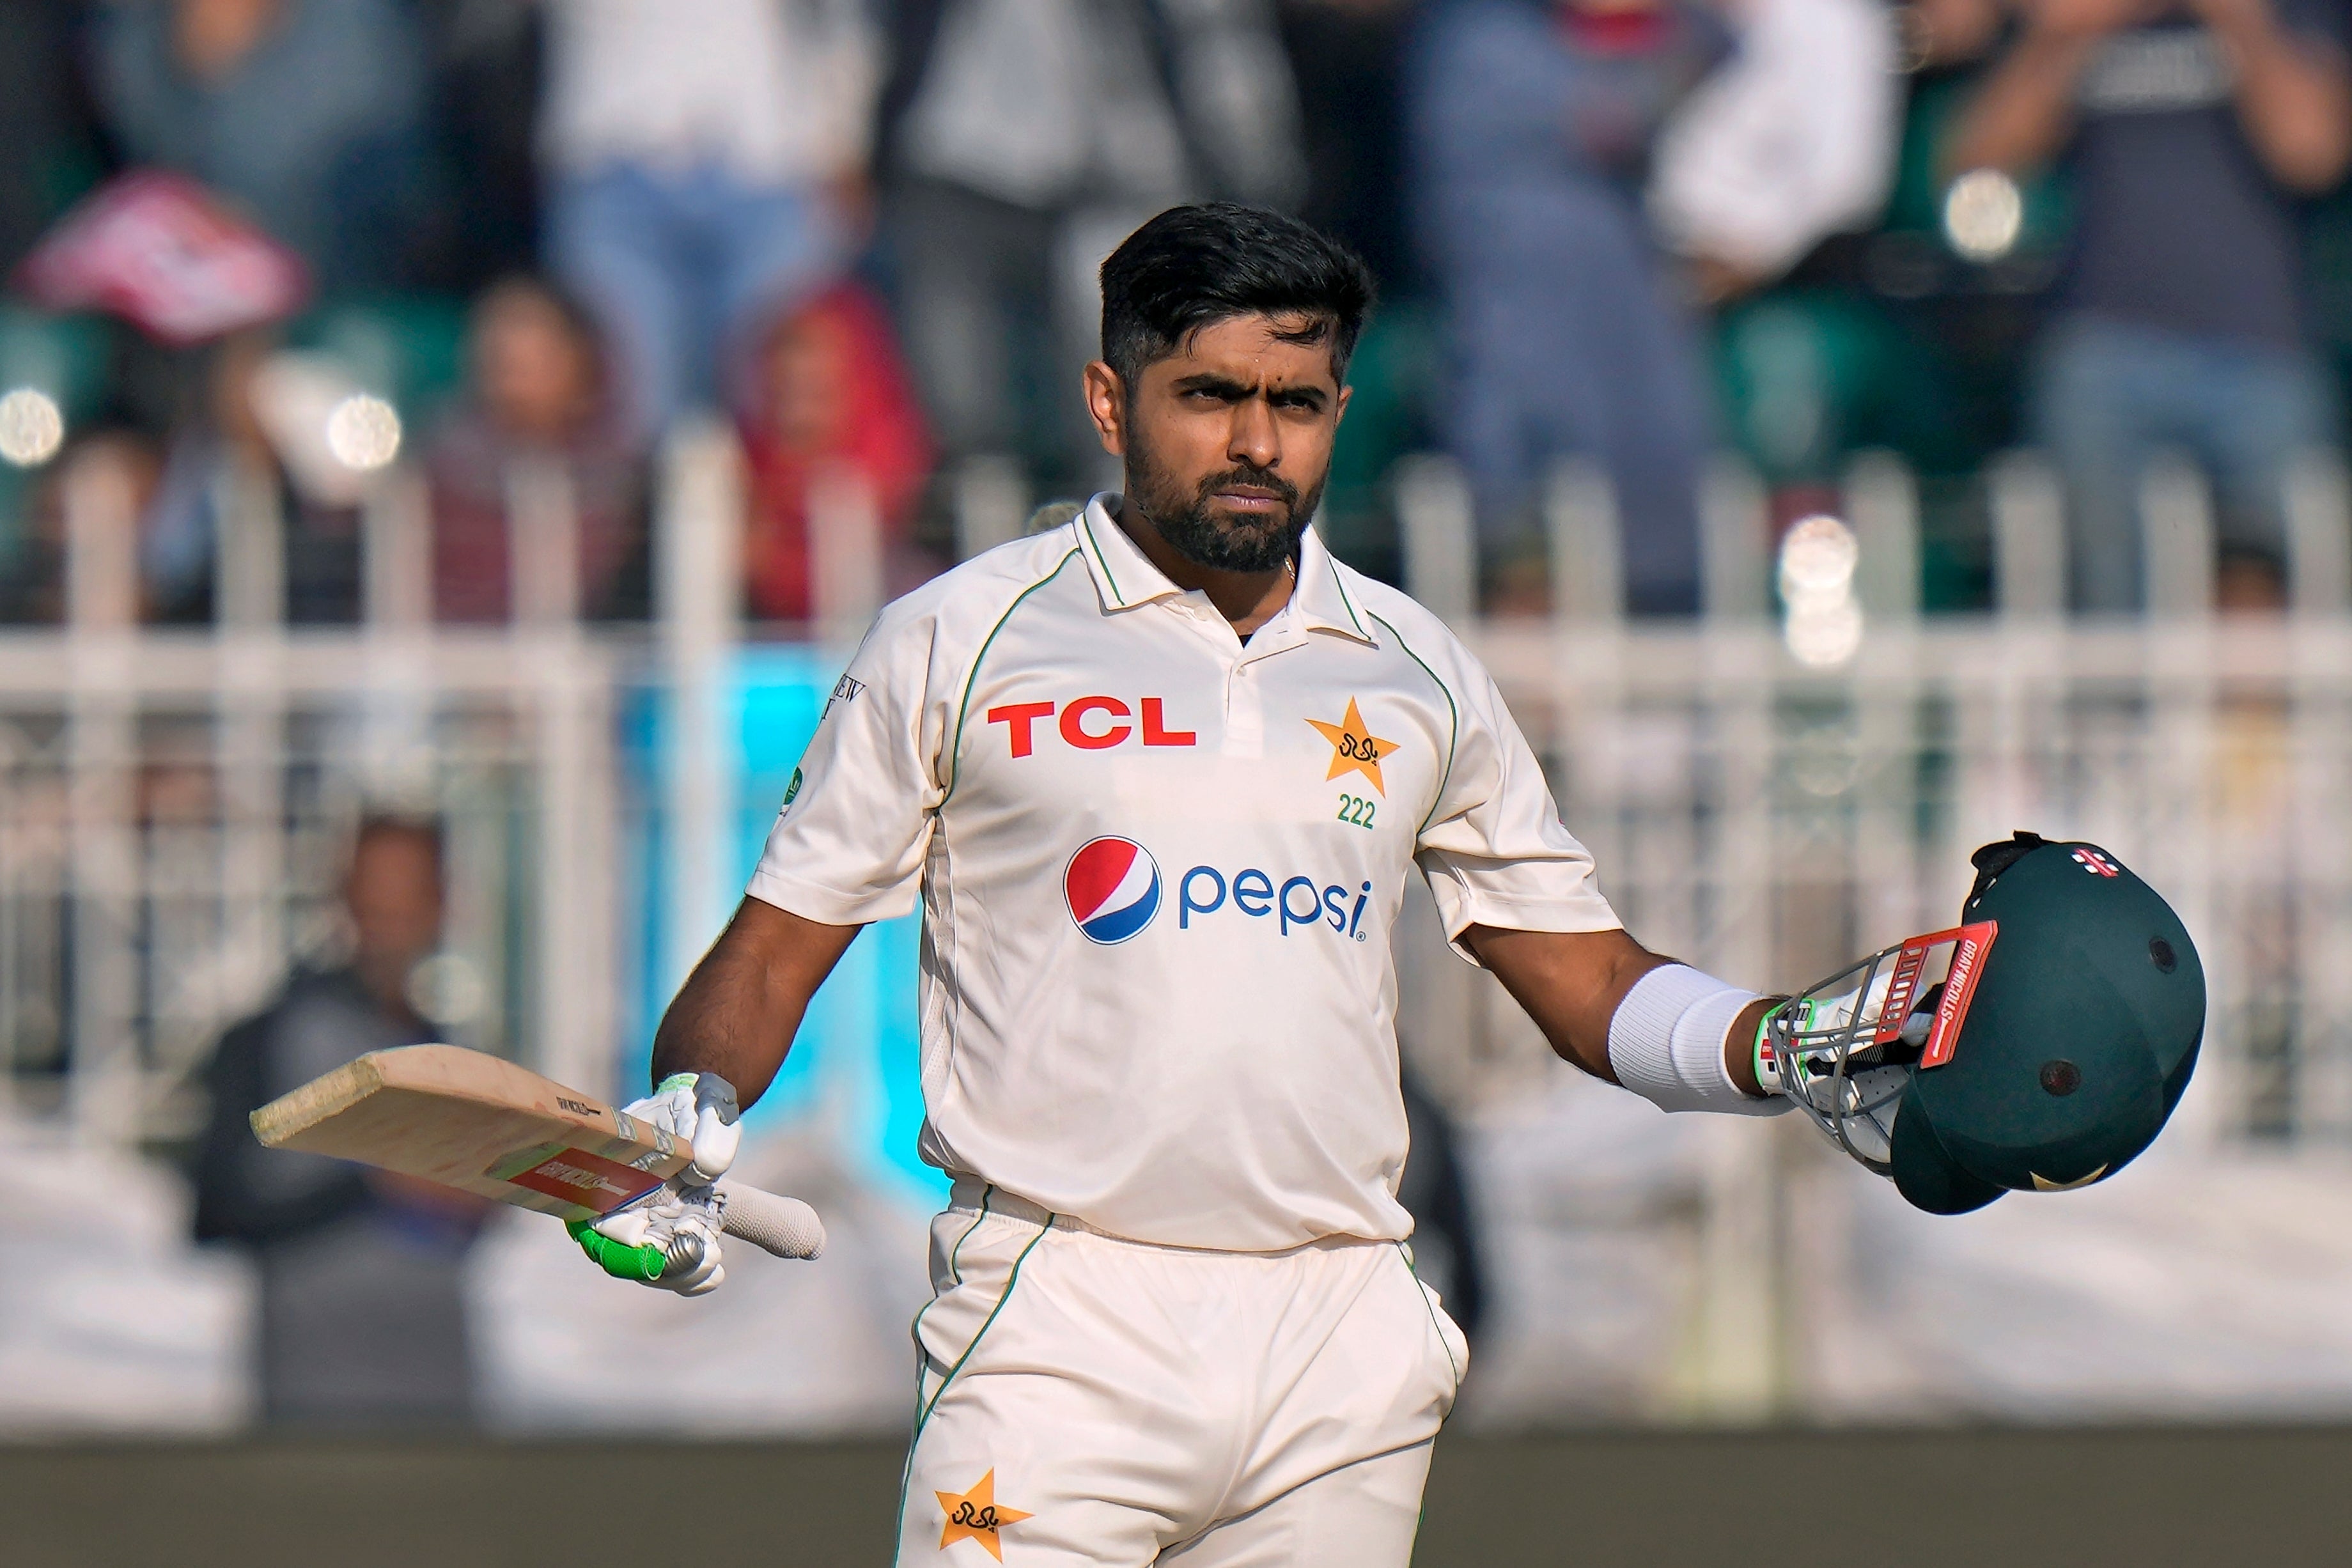 Pakistan captain Babar played an elegant innings to become the seventh centurion of the Test